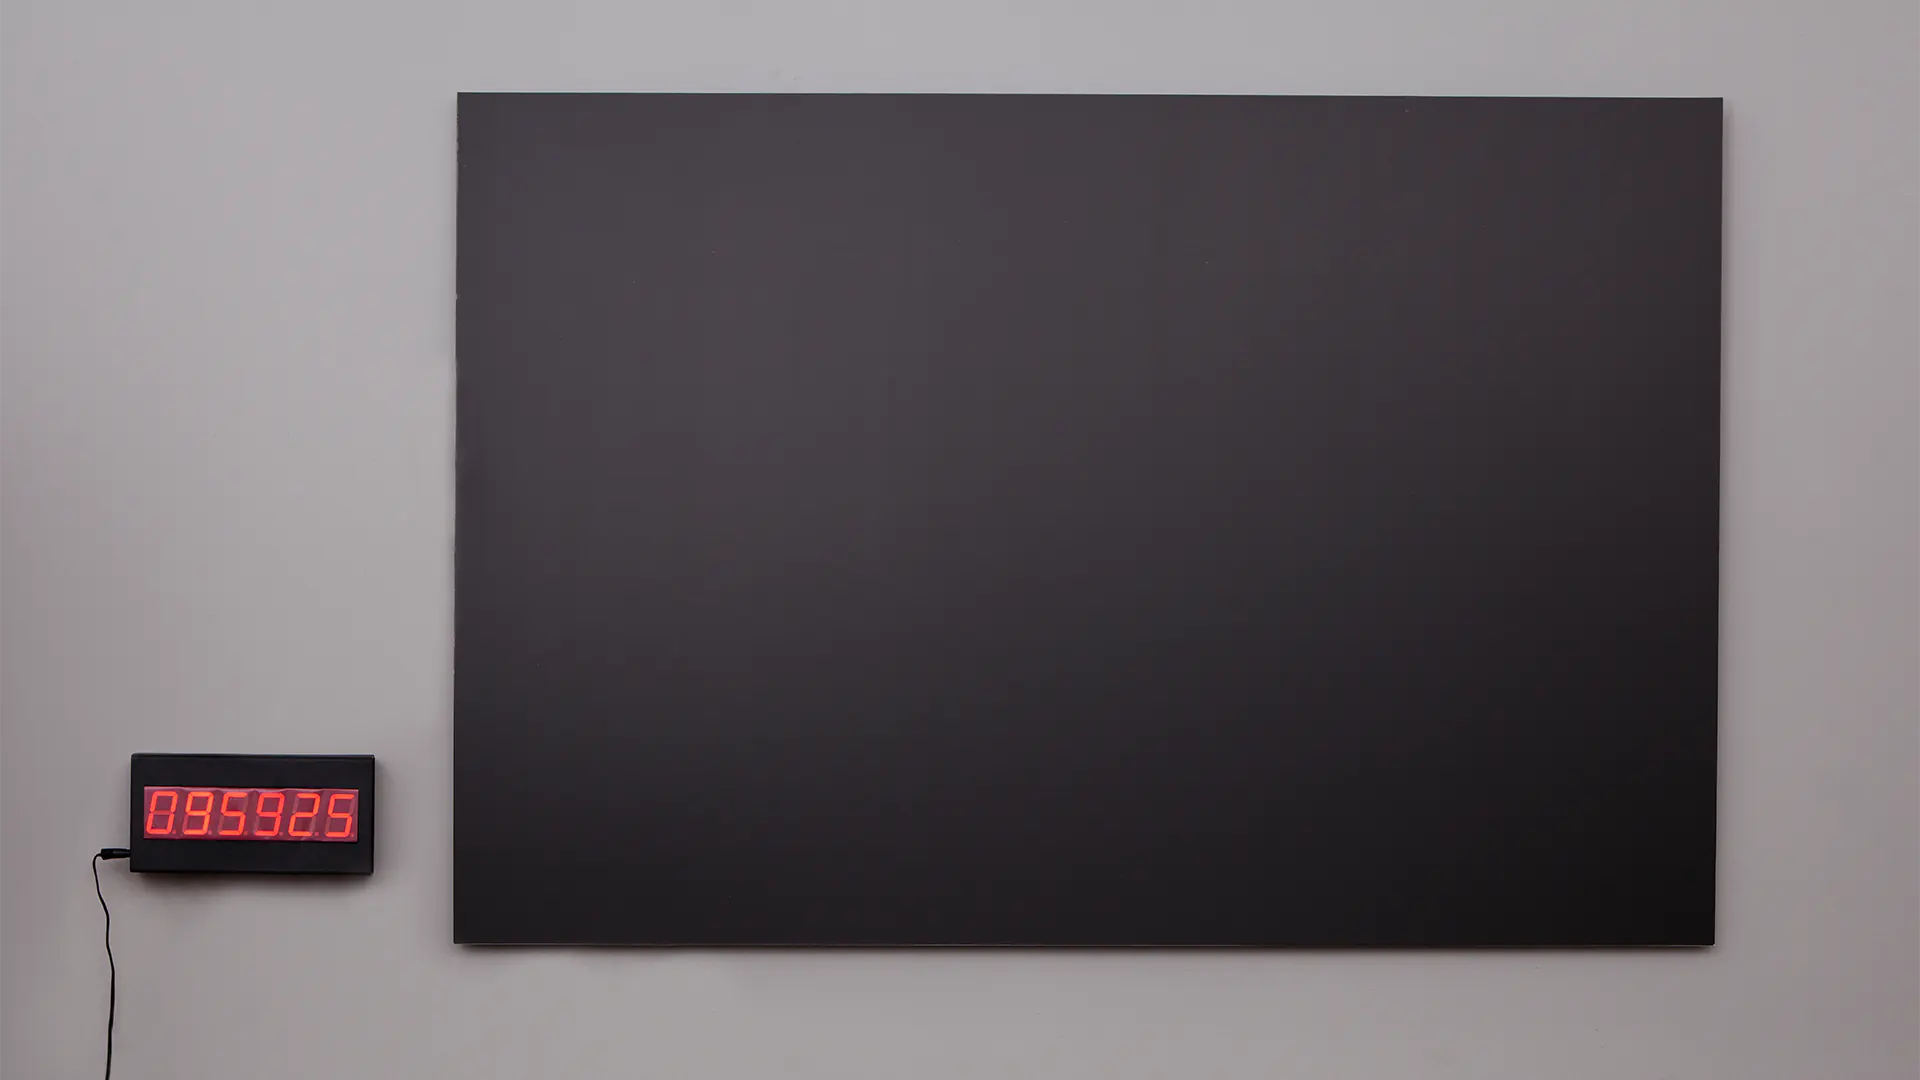 The installation Black Hole consists of an empty black image and a digital counter.